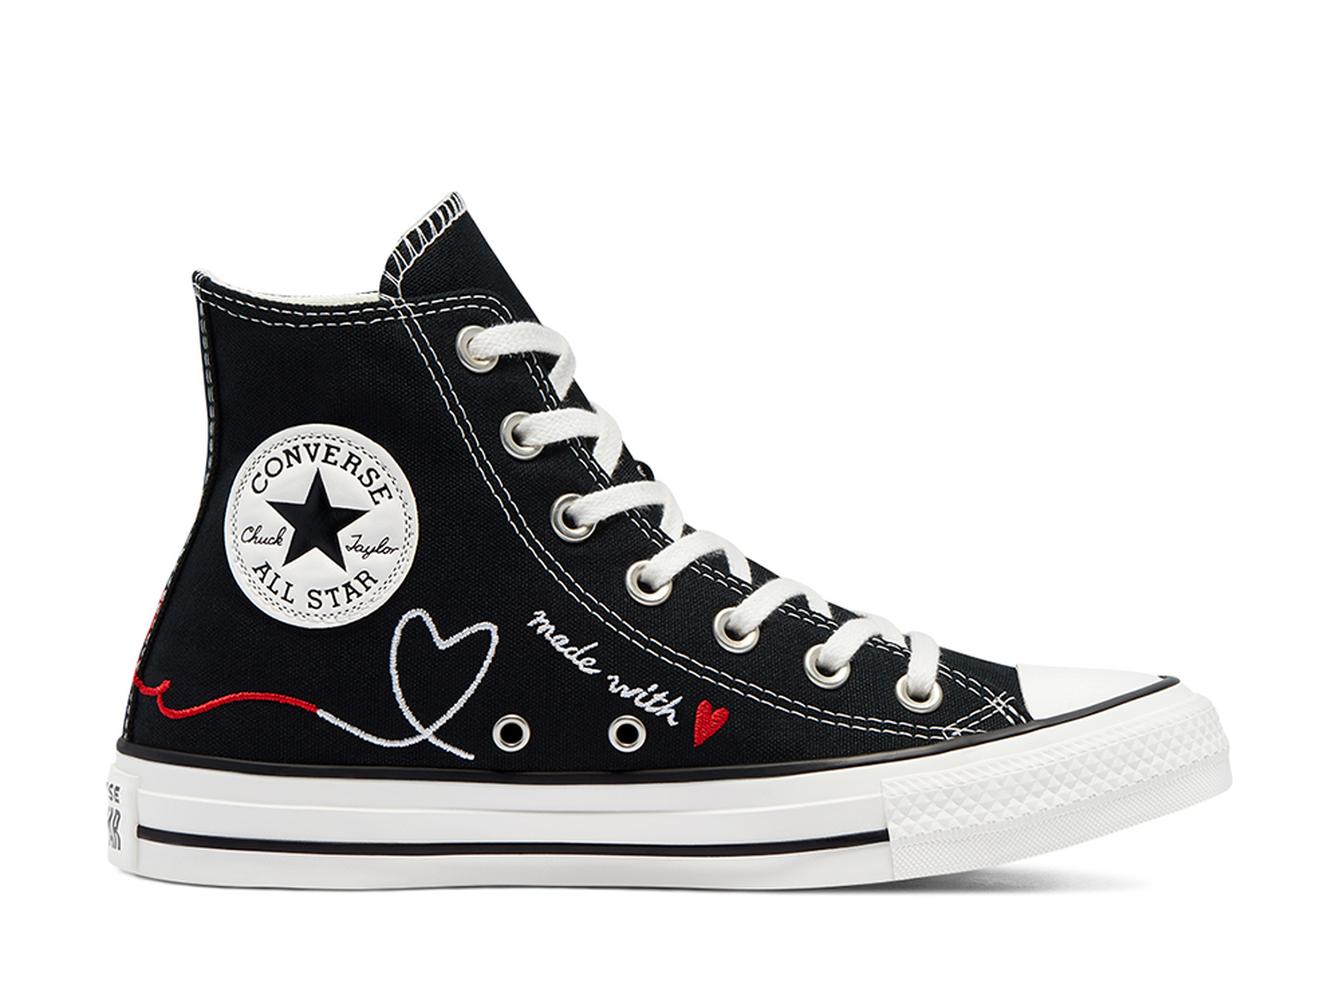 Made With Love Chuck Taylor All Star